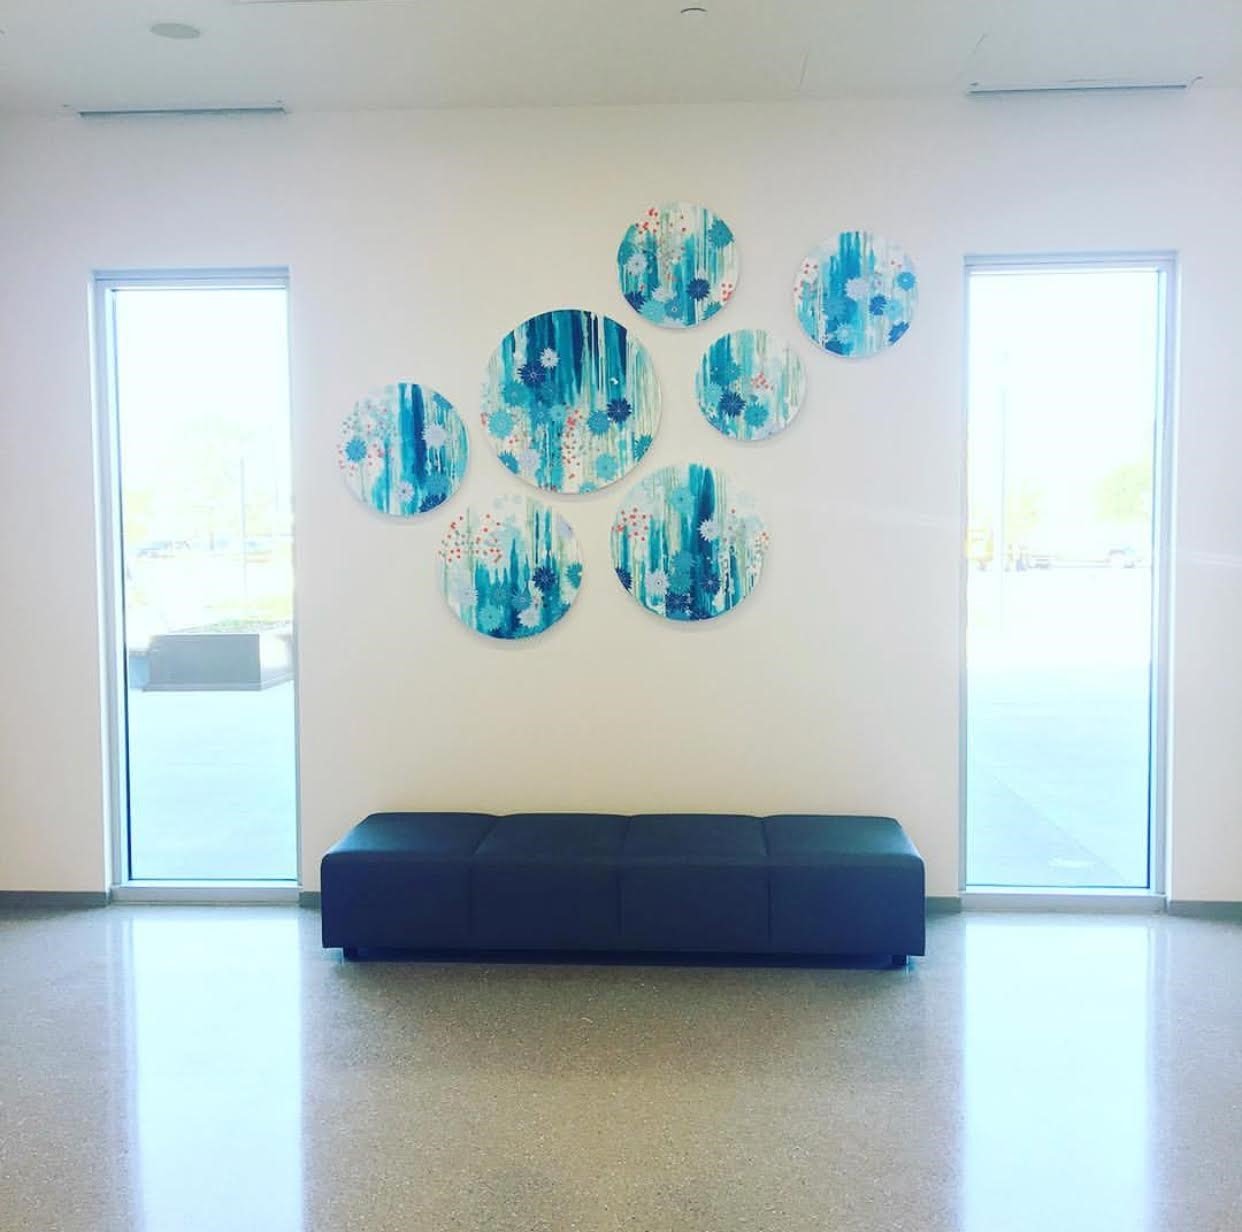  Entry of UCSD Medical Campus, La Jolla, CA Commissioned by Susan Street Fine Art, 7'x10' circle installation 